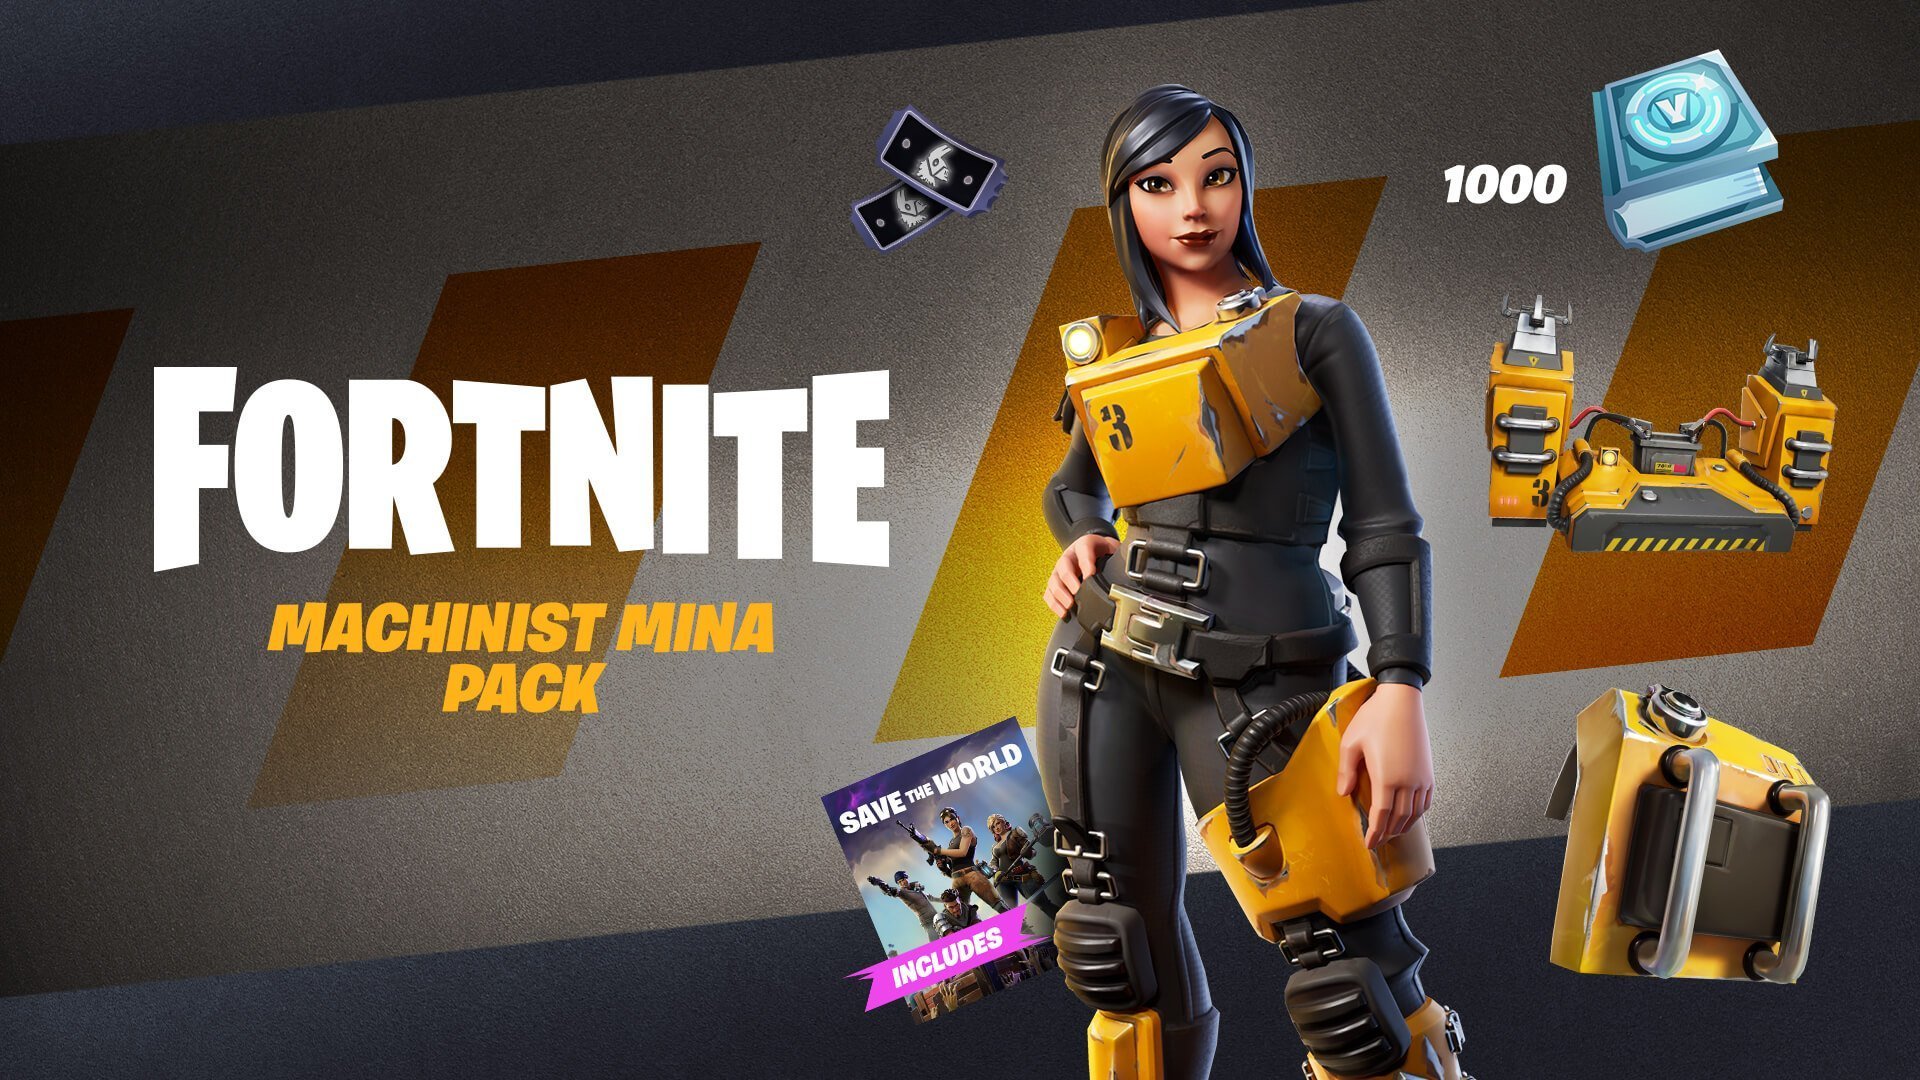 What Fortnite Save The World Bundle Comes With The Skins Fortnite Machinist Mina Skin Pack Release Date Cosmetics Fortnite Insider